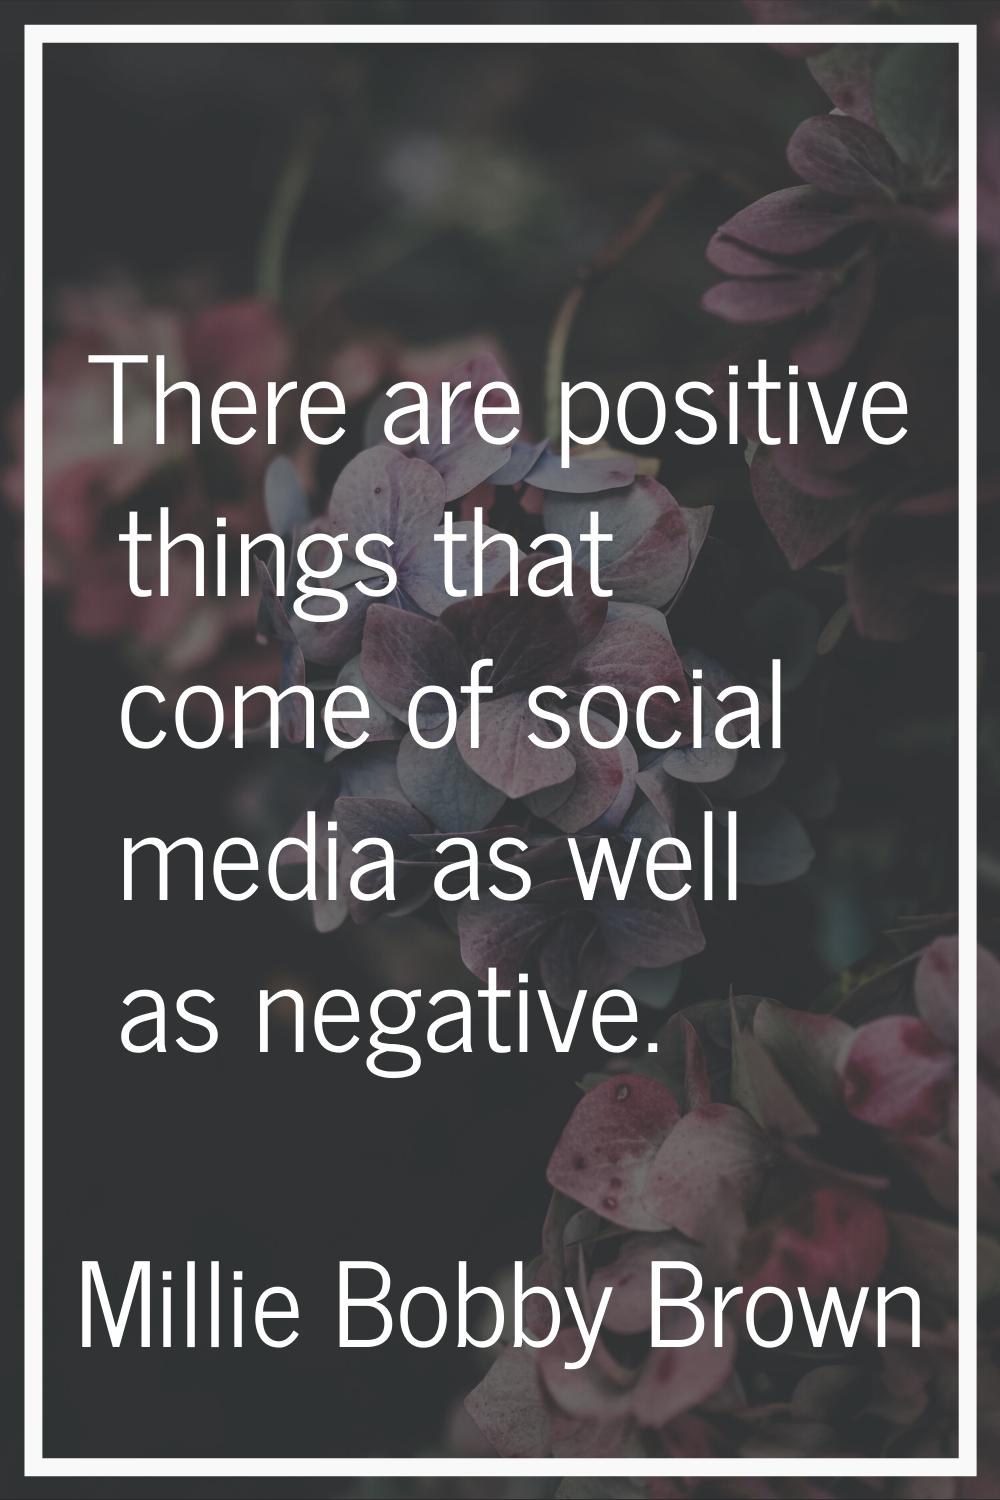 There are positive things that come of social media as well as negative.